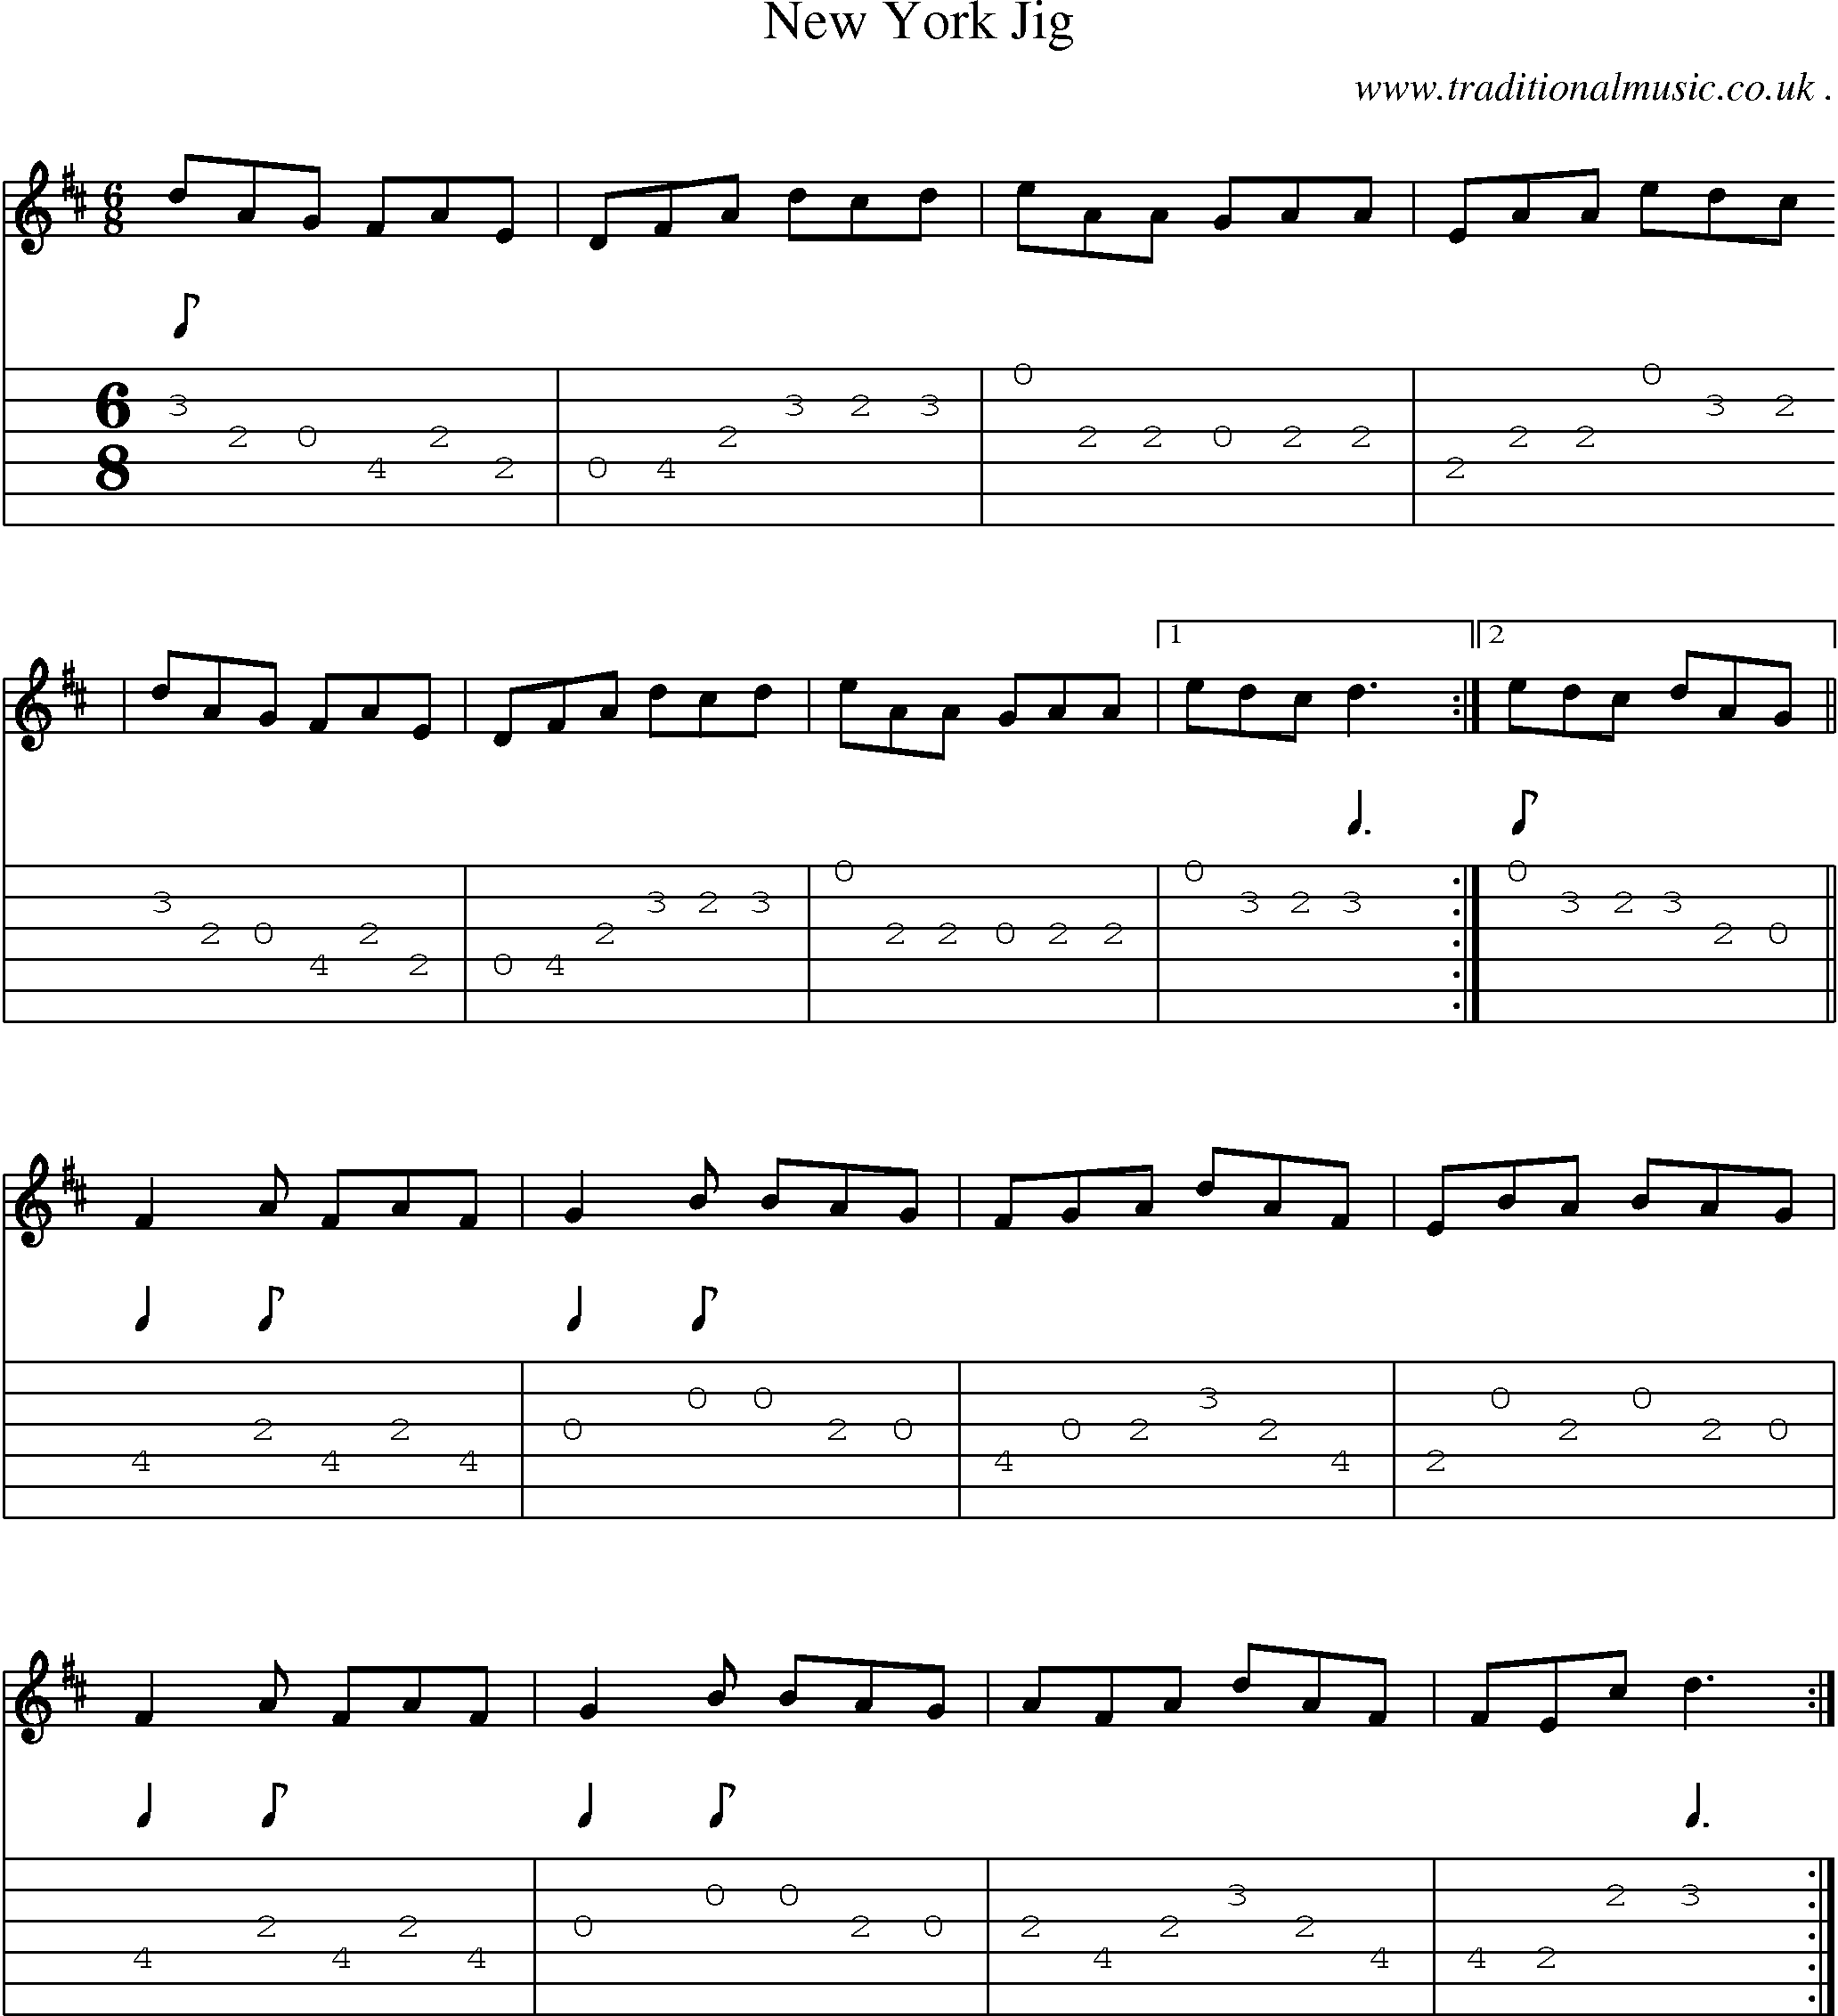 Sheet-Music and Guitar Tabs for New York Jig